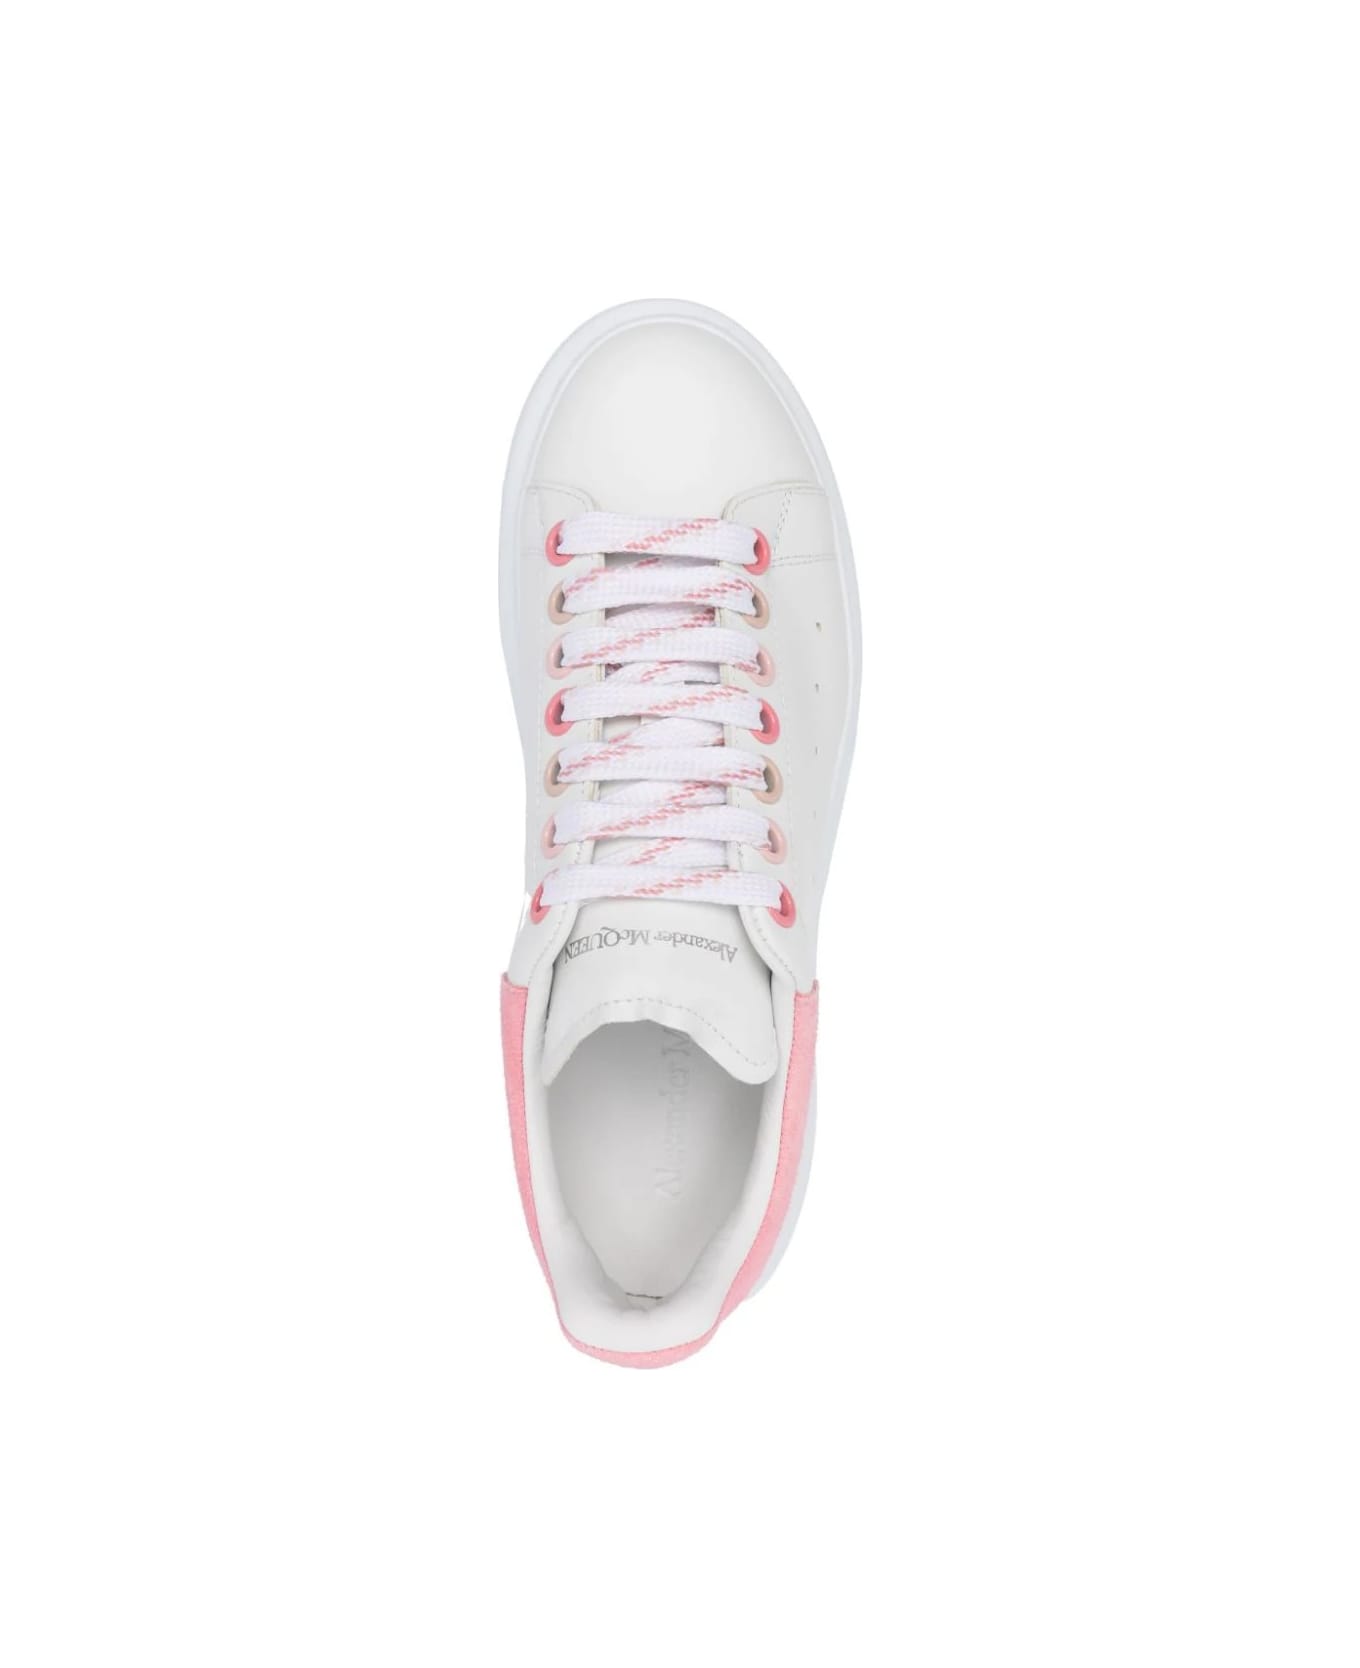 Alexander McQueen White Oversized Sneakers With Pink And Multicolour Details - White ウェッジシューズ